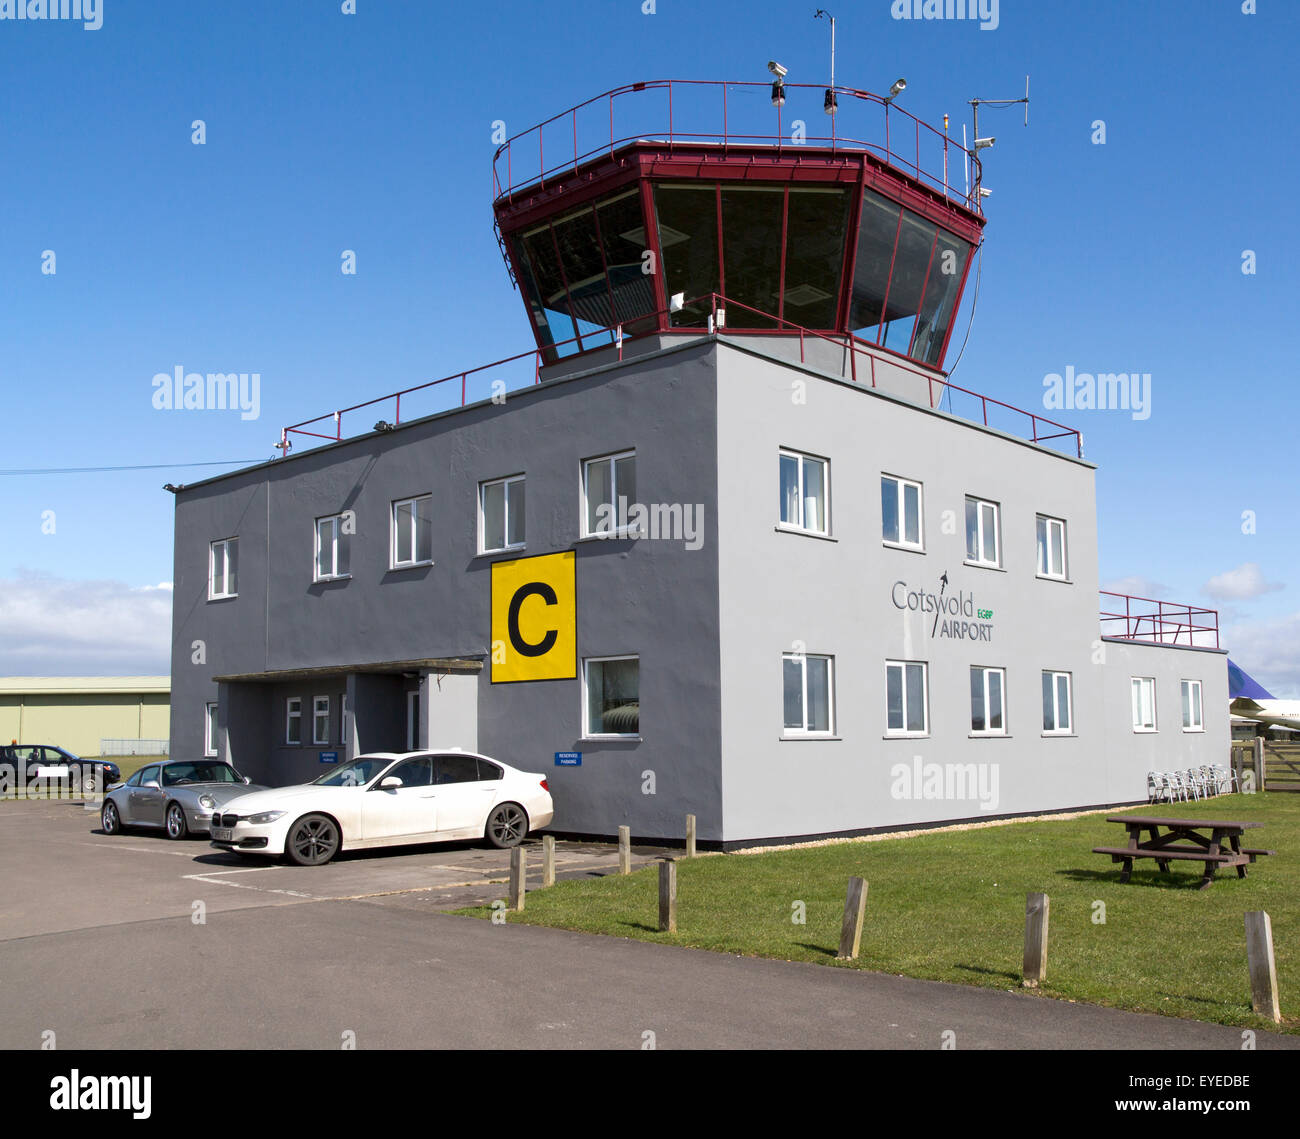 Control tower, Cotswold Airport, Cirencester, Gloucestershire, England, UK Stock Photo